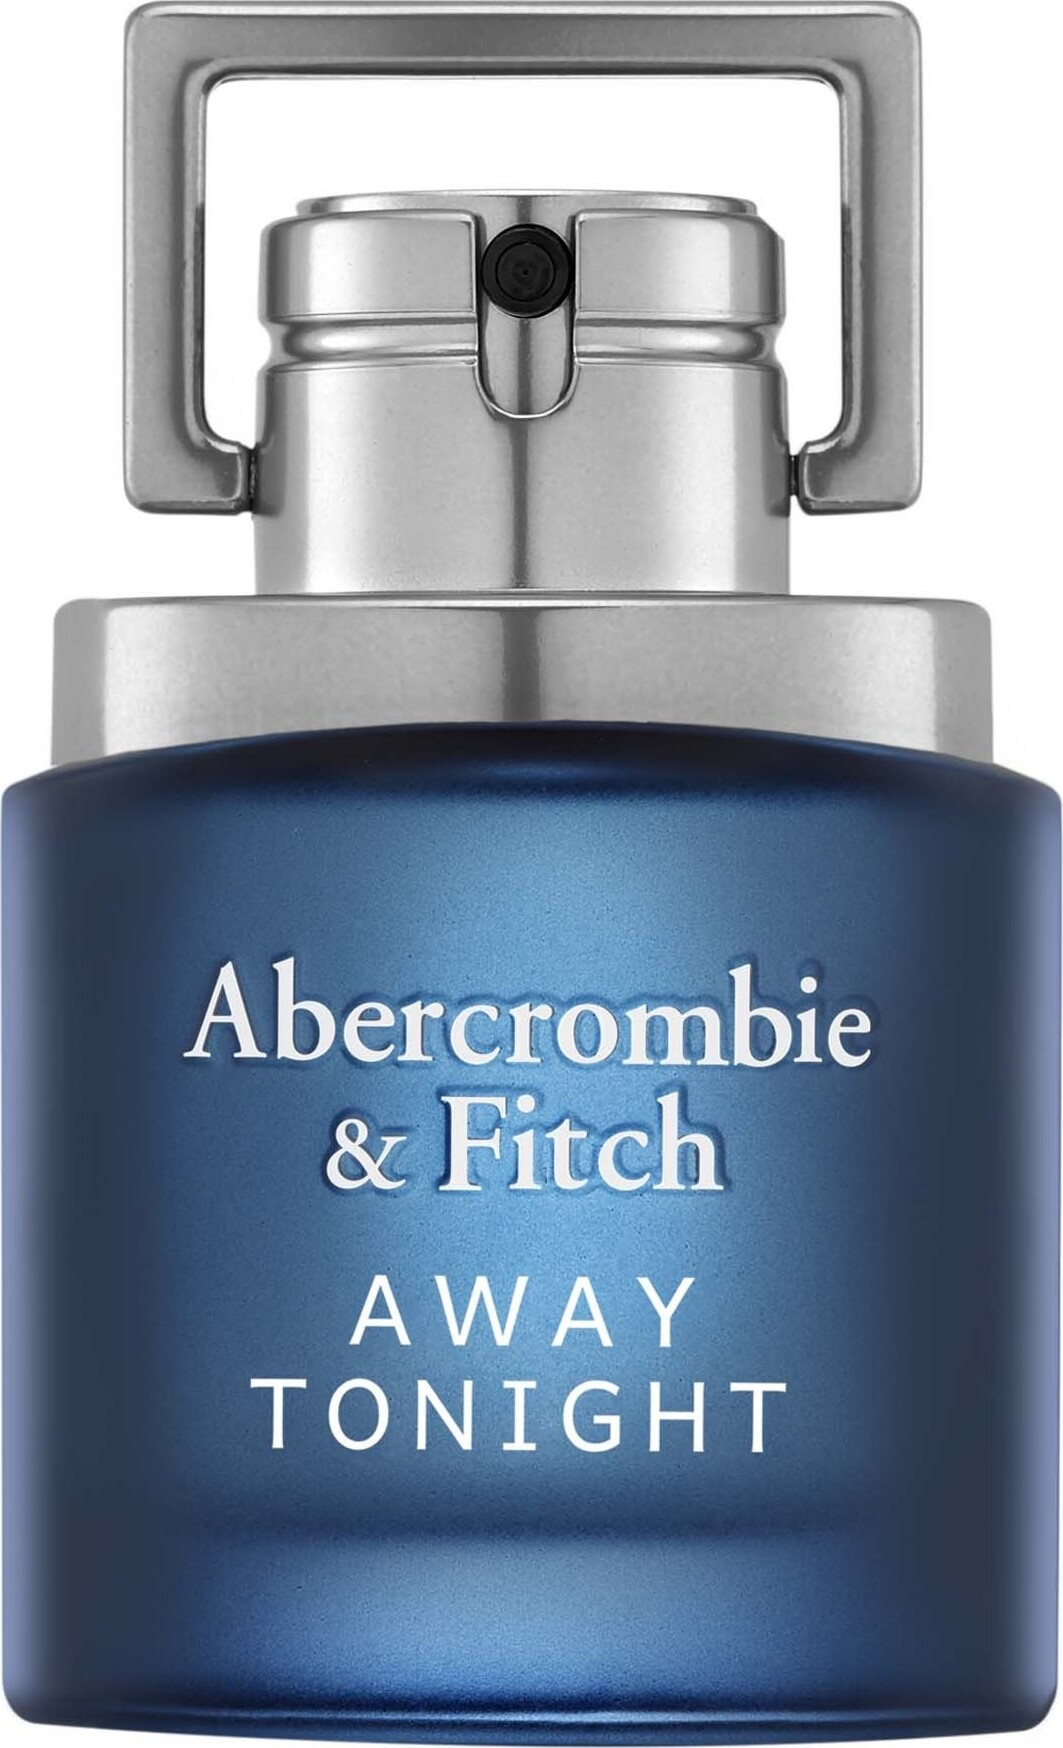 Se Abercrombie & Fitch - Away Tonight Edt 30 Ml hos Gucca.dk